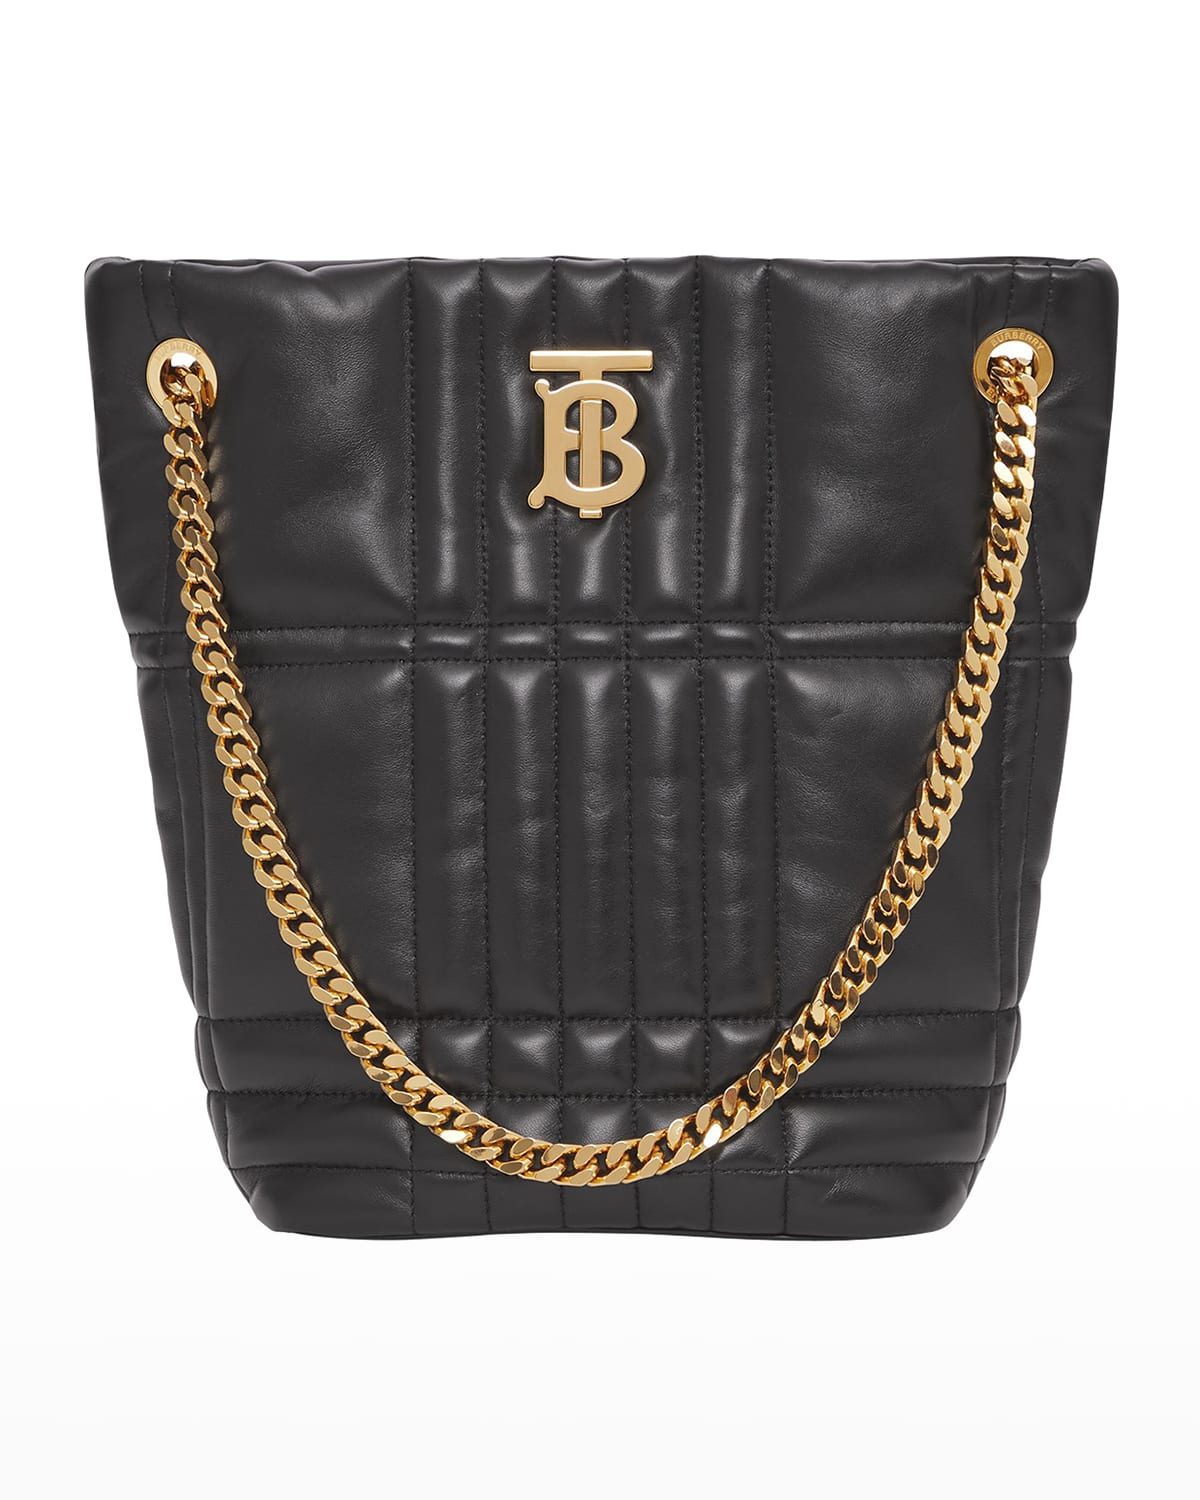 Burberry Lola Small TB Quilted Leather Chain Bucket Bag